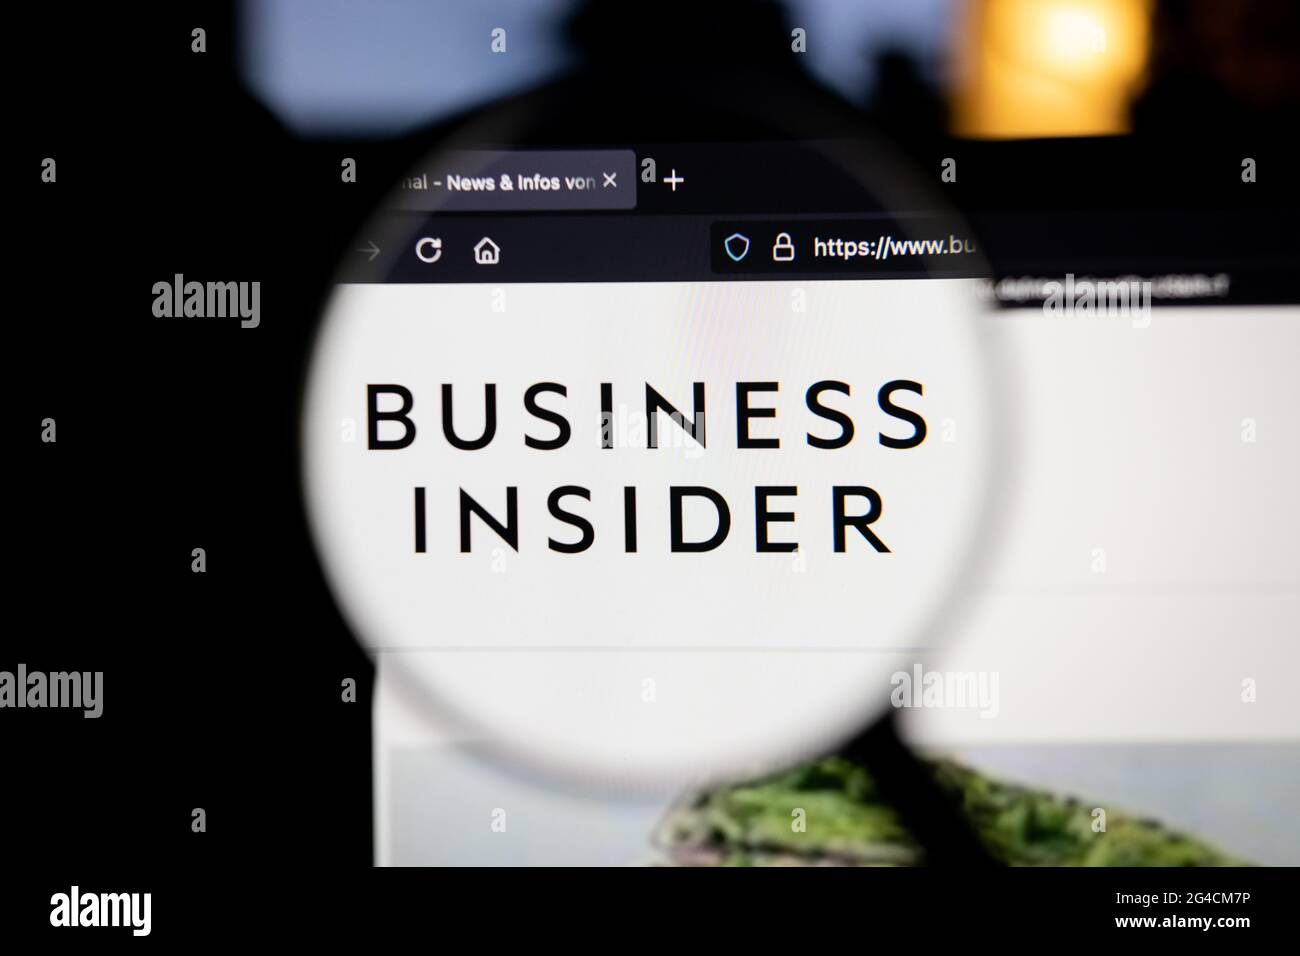 Business Insider company logo on a website, seen on a computer screen through a magnifying glass. Stock Photo